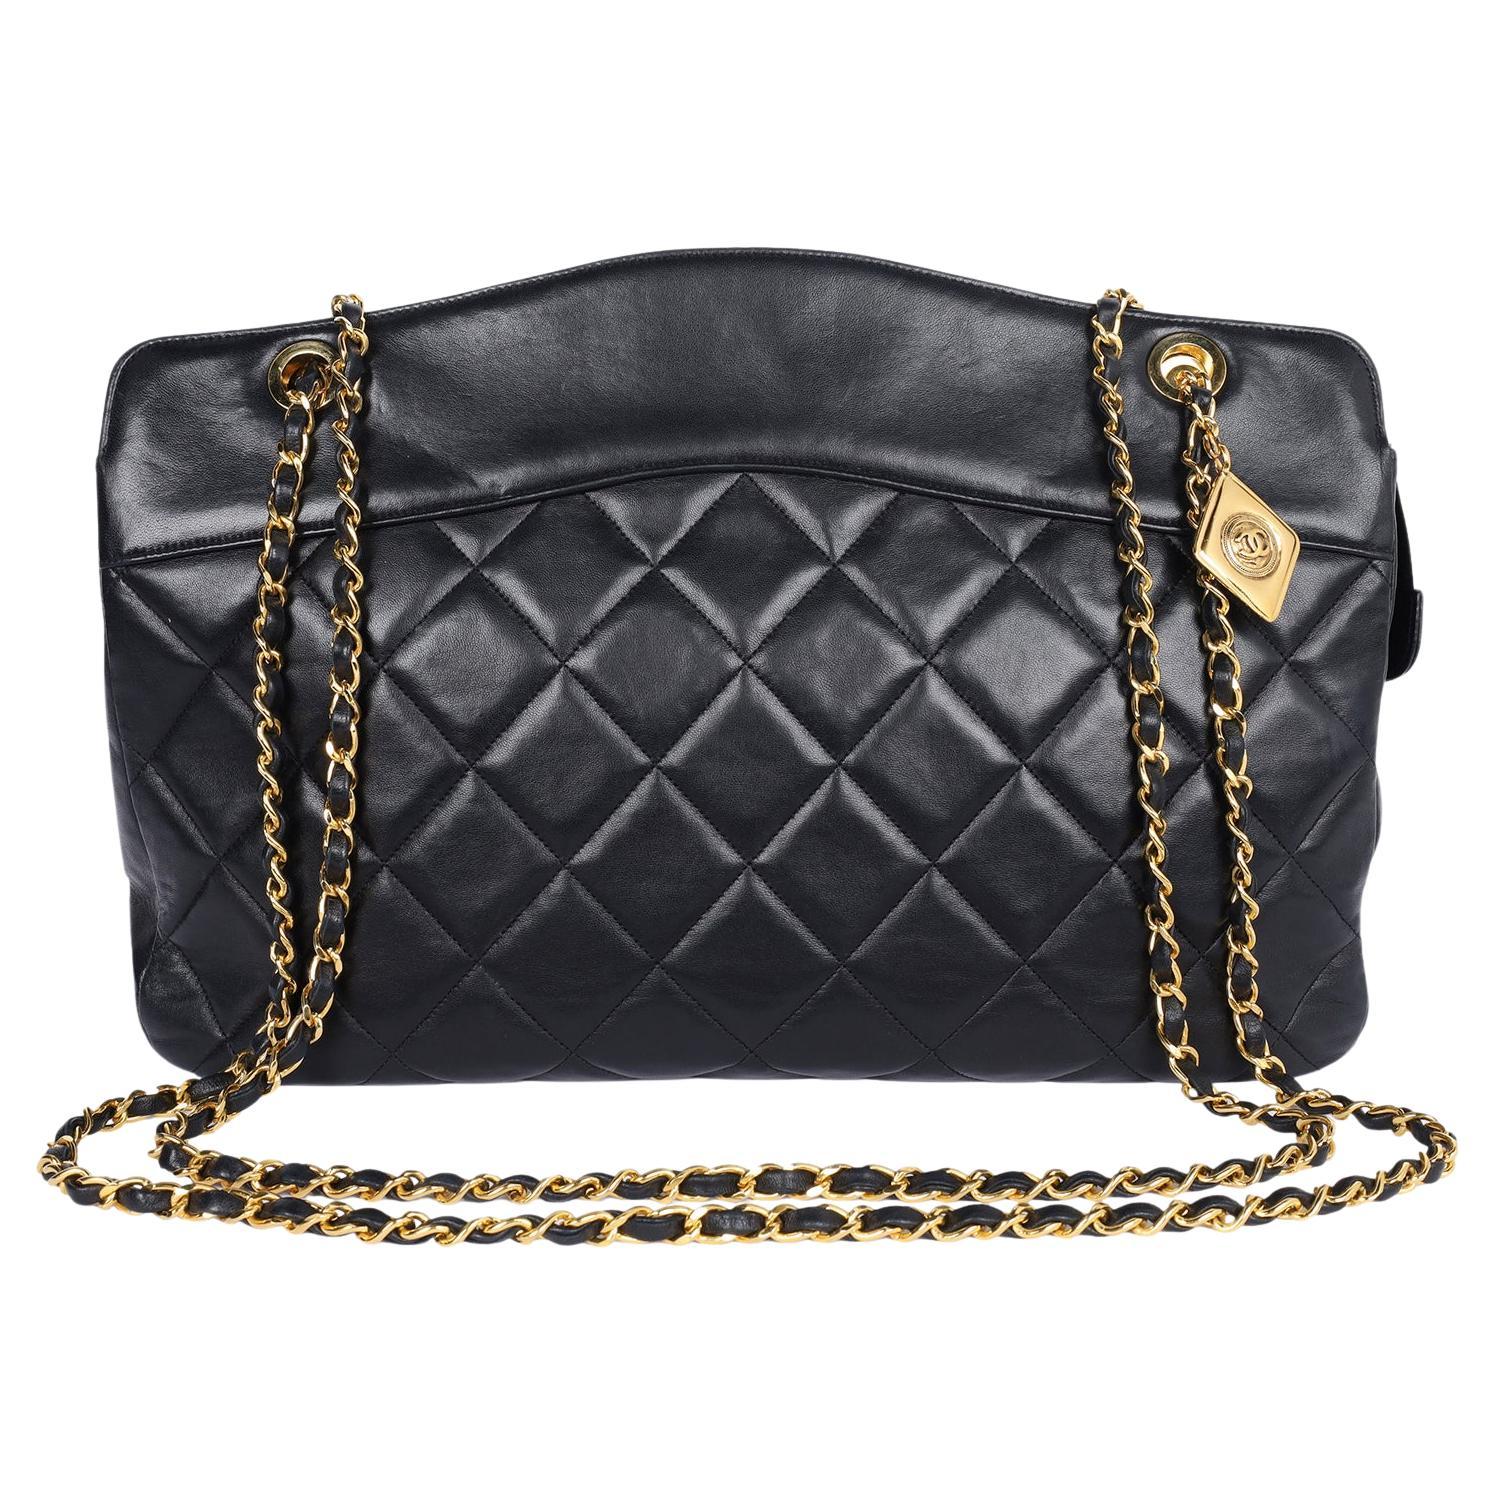 Chanel Black Quilted Lambskin Leather Crossbody Bag 1989 For Sale